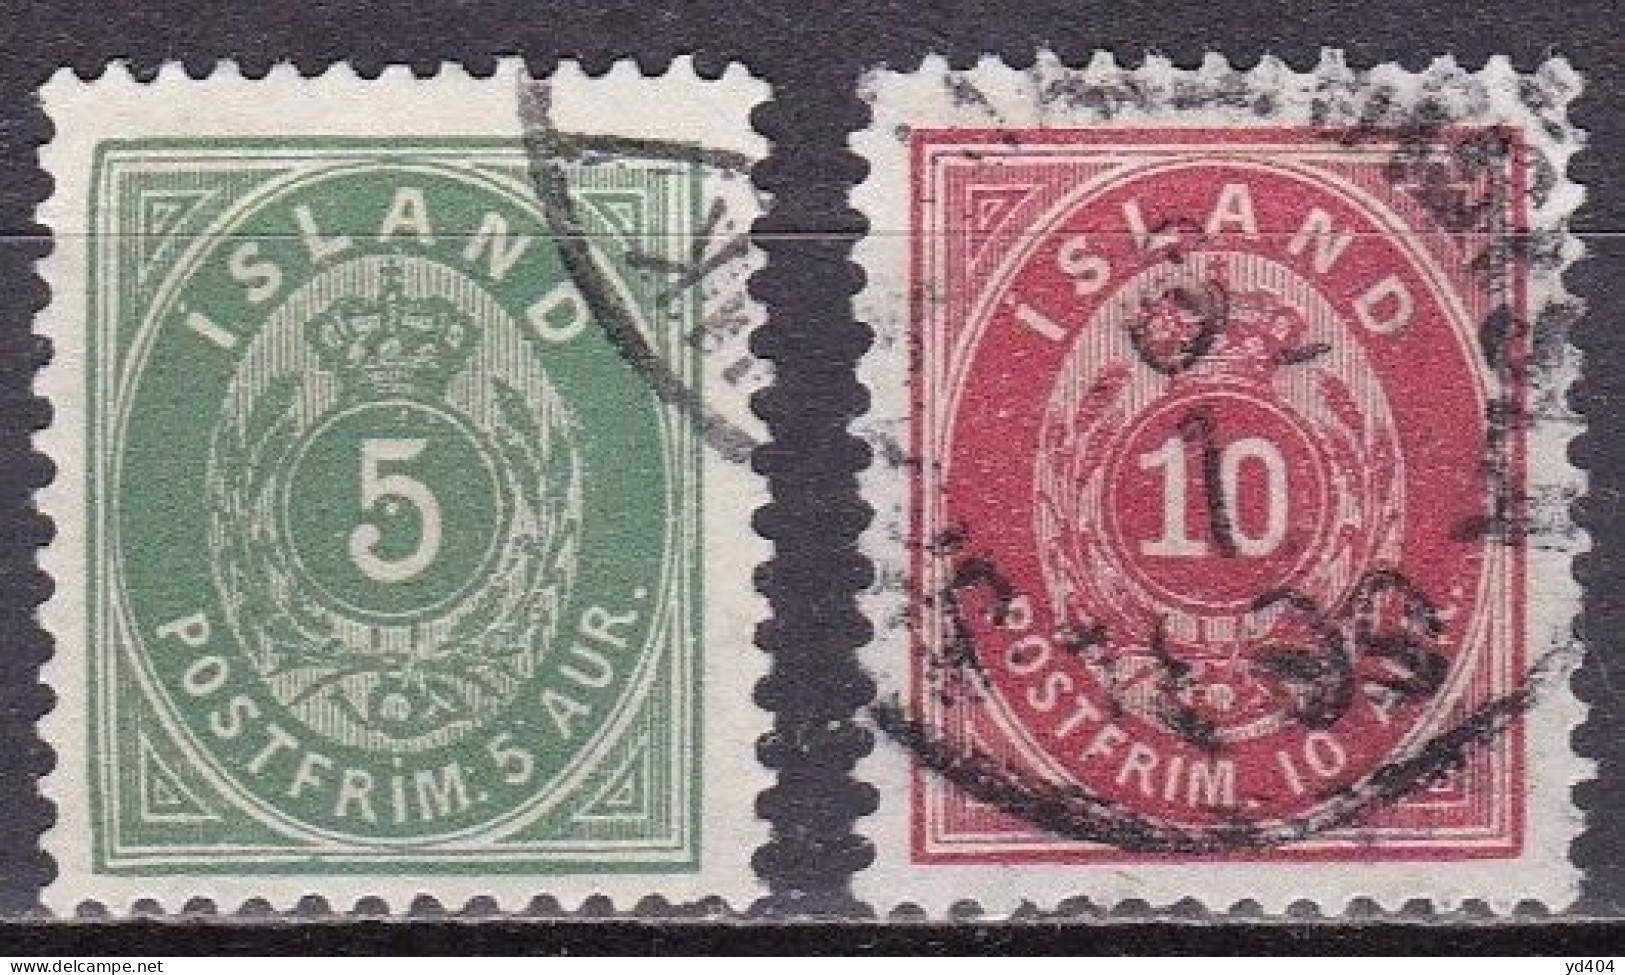 IS003E – ISLANDE – ICELAND – 1897 – NUMERAL VALUE IN AUR - PERF. 12,5 – SG # 28-30 USED 6,50 € - Usados